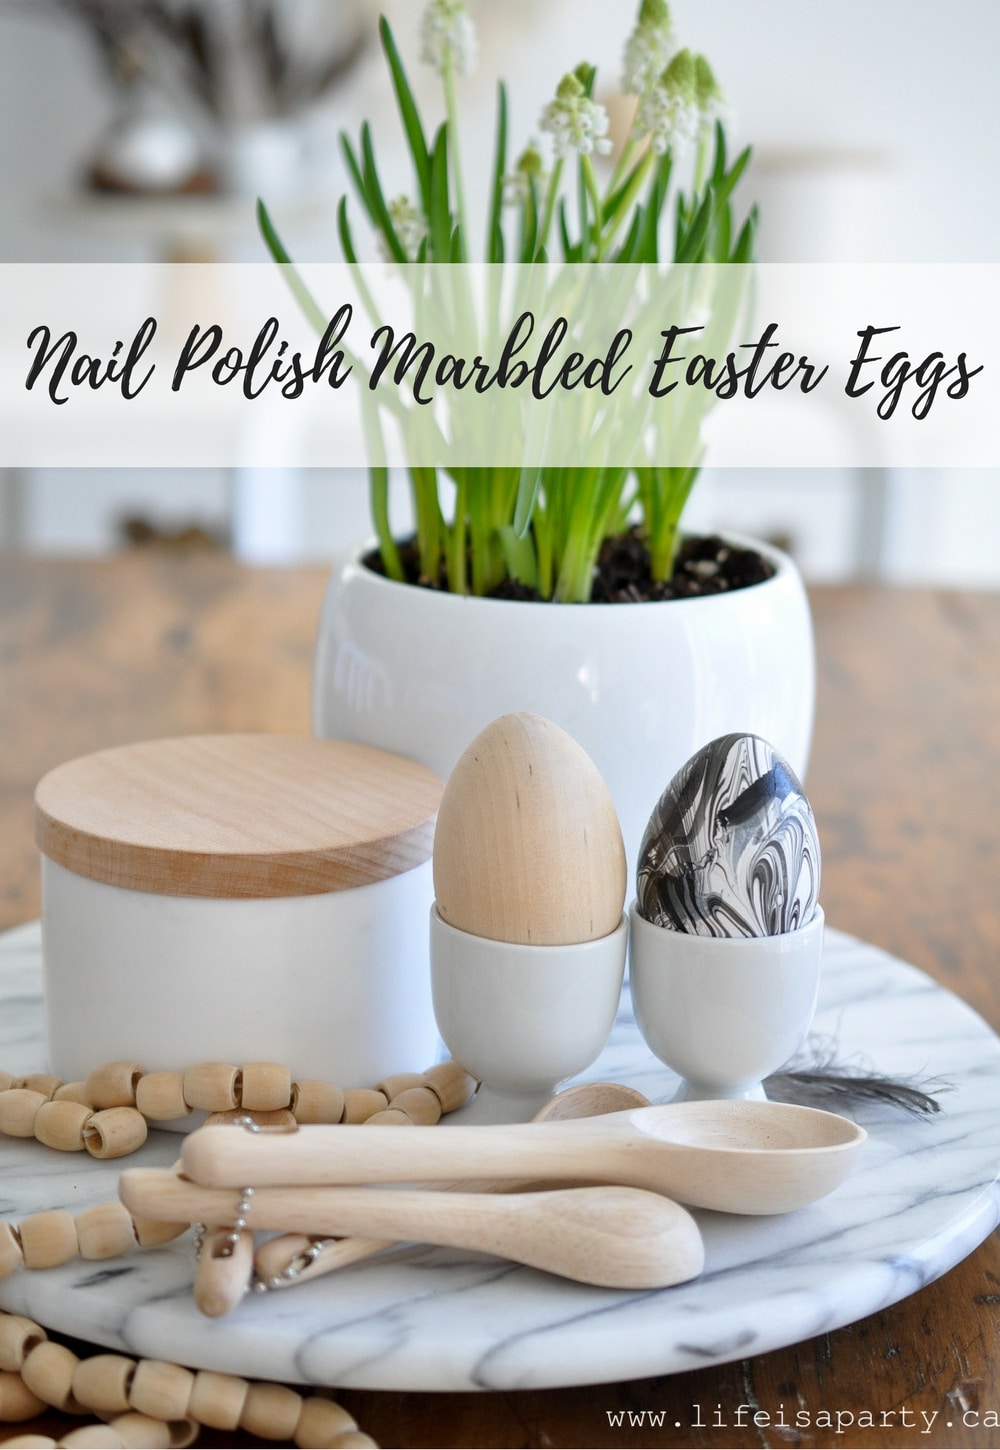 Nail Polished Marbled Easter Eggs: easy water marbling with nail polish is the perfect modern touch to your Easter eggs.